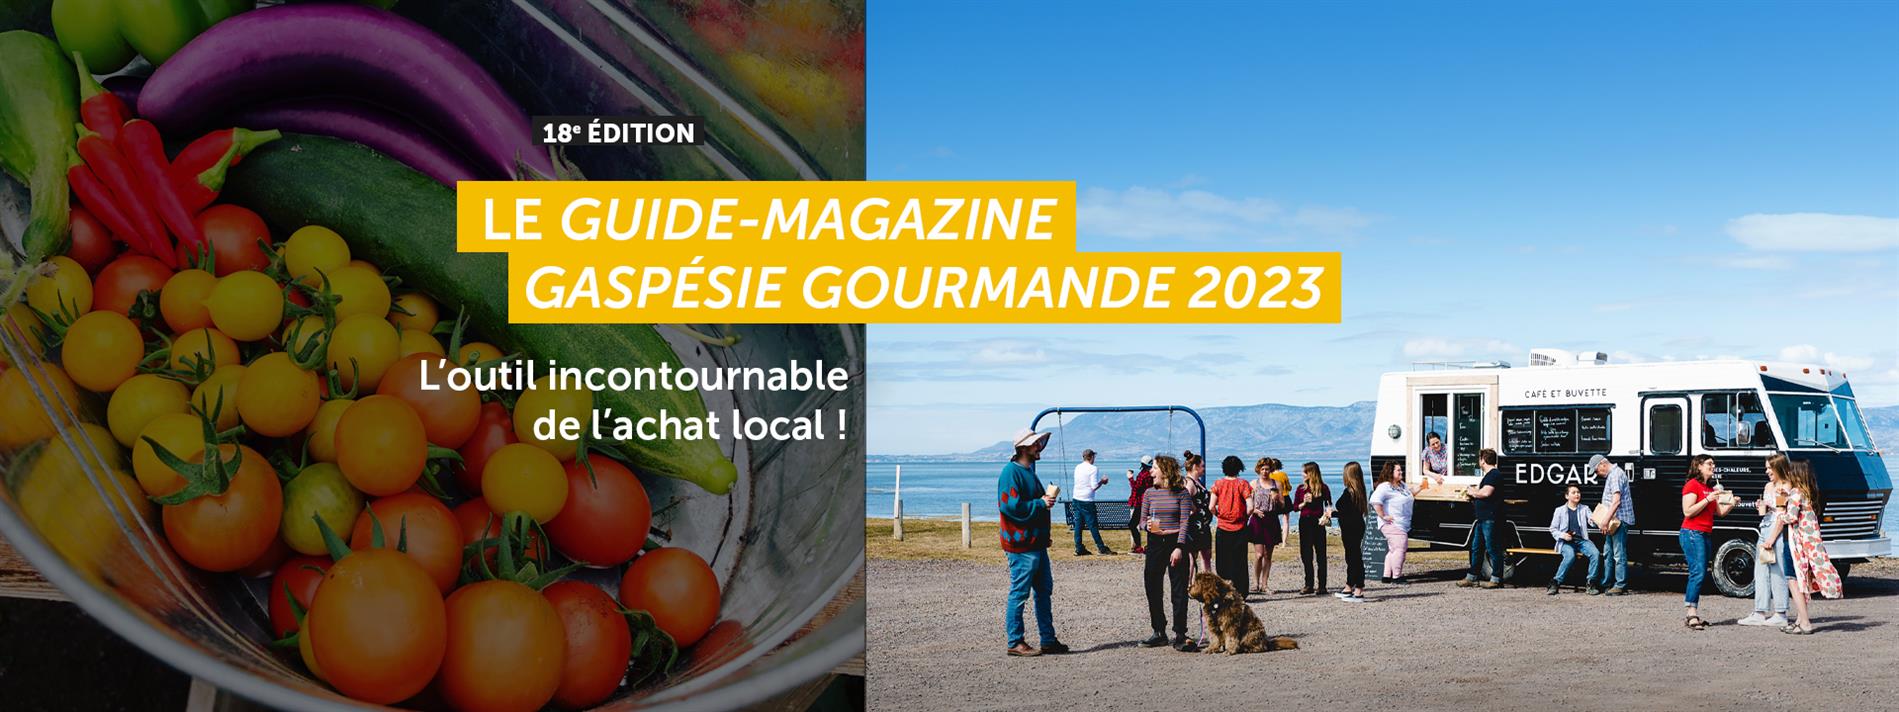 GUIDE MAG2023